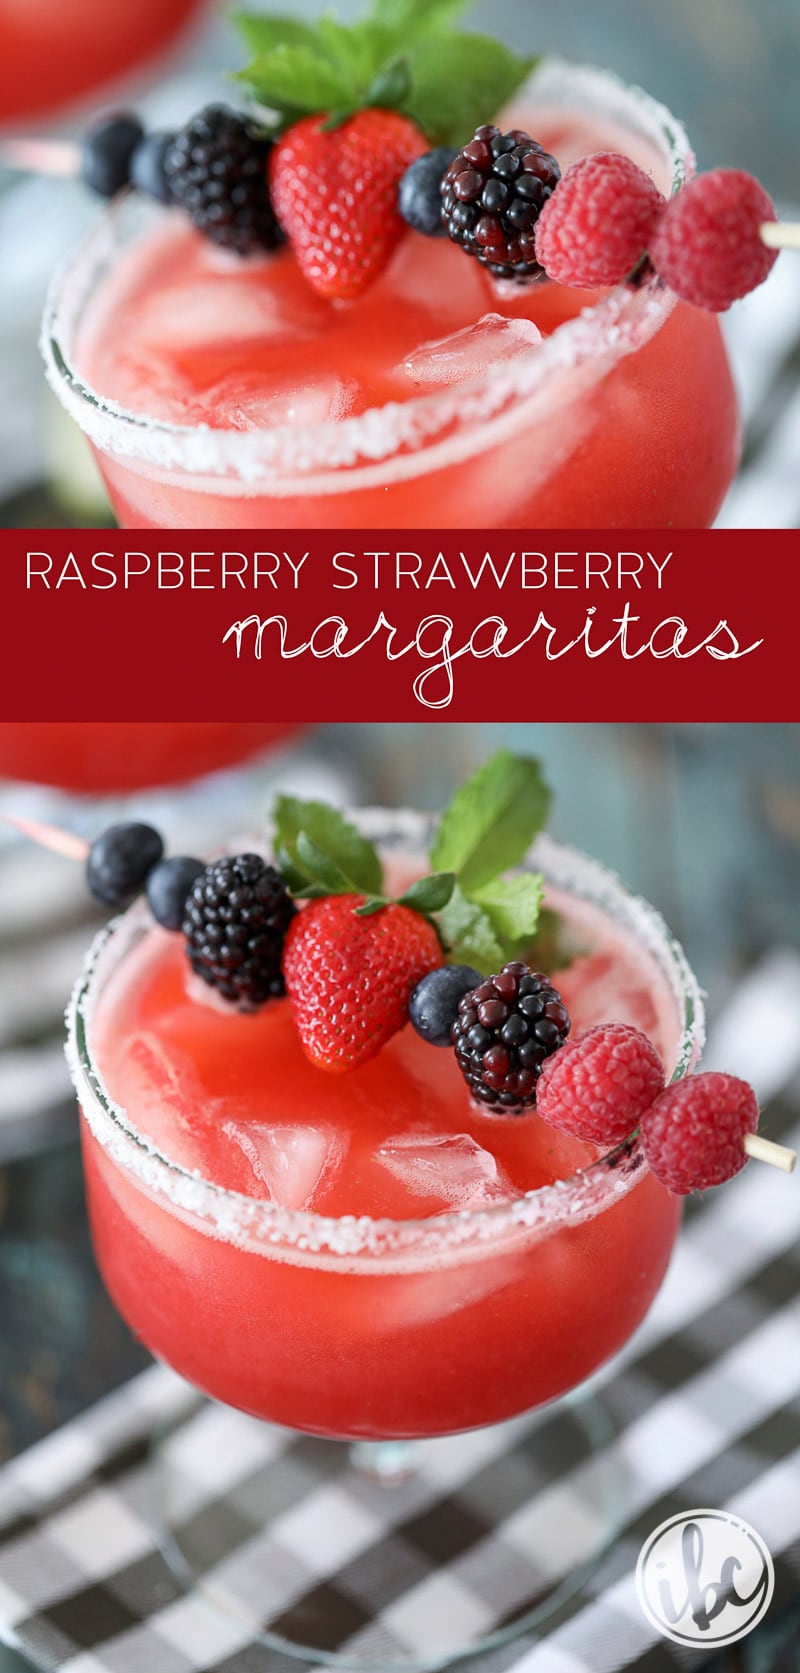 These Raspberry Strawberry Margaritas are a delicious summer cocktail recipes! #strawberry #margarita #cocktail #recipe